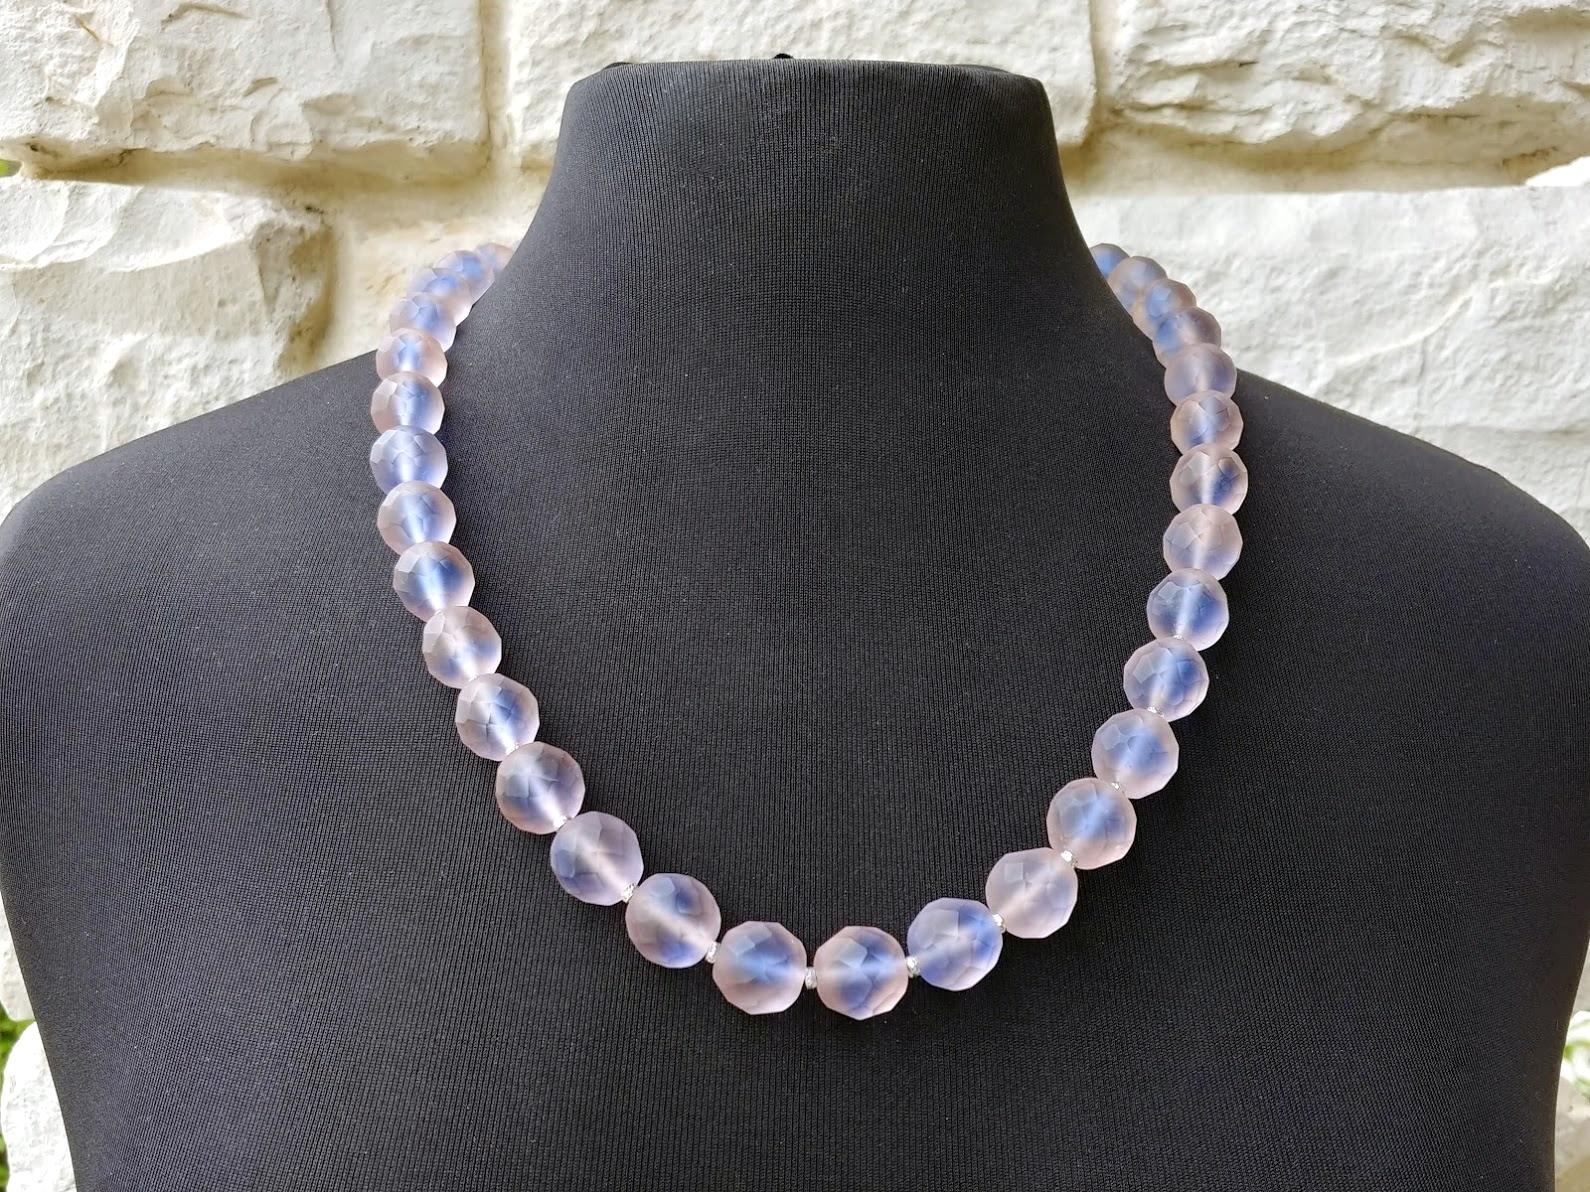 The length of the necklace is 25 inches (63.5 cm). The size of the faceted beads is 14 mm.
A stunning, very pretty vintage strand of old sapphire glass beads. The very light purple-blue bead is faceted with a deep lavender tone towards the center.